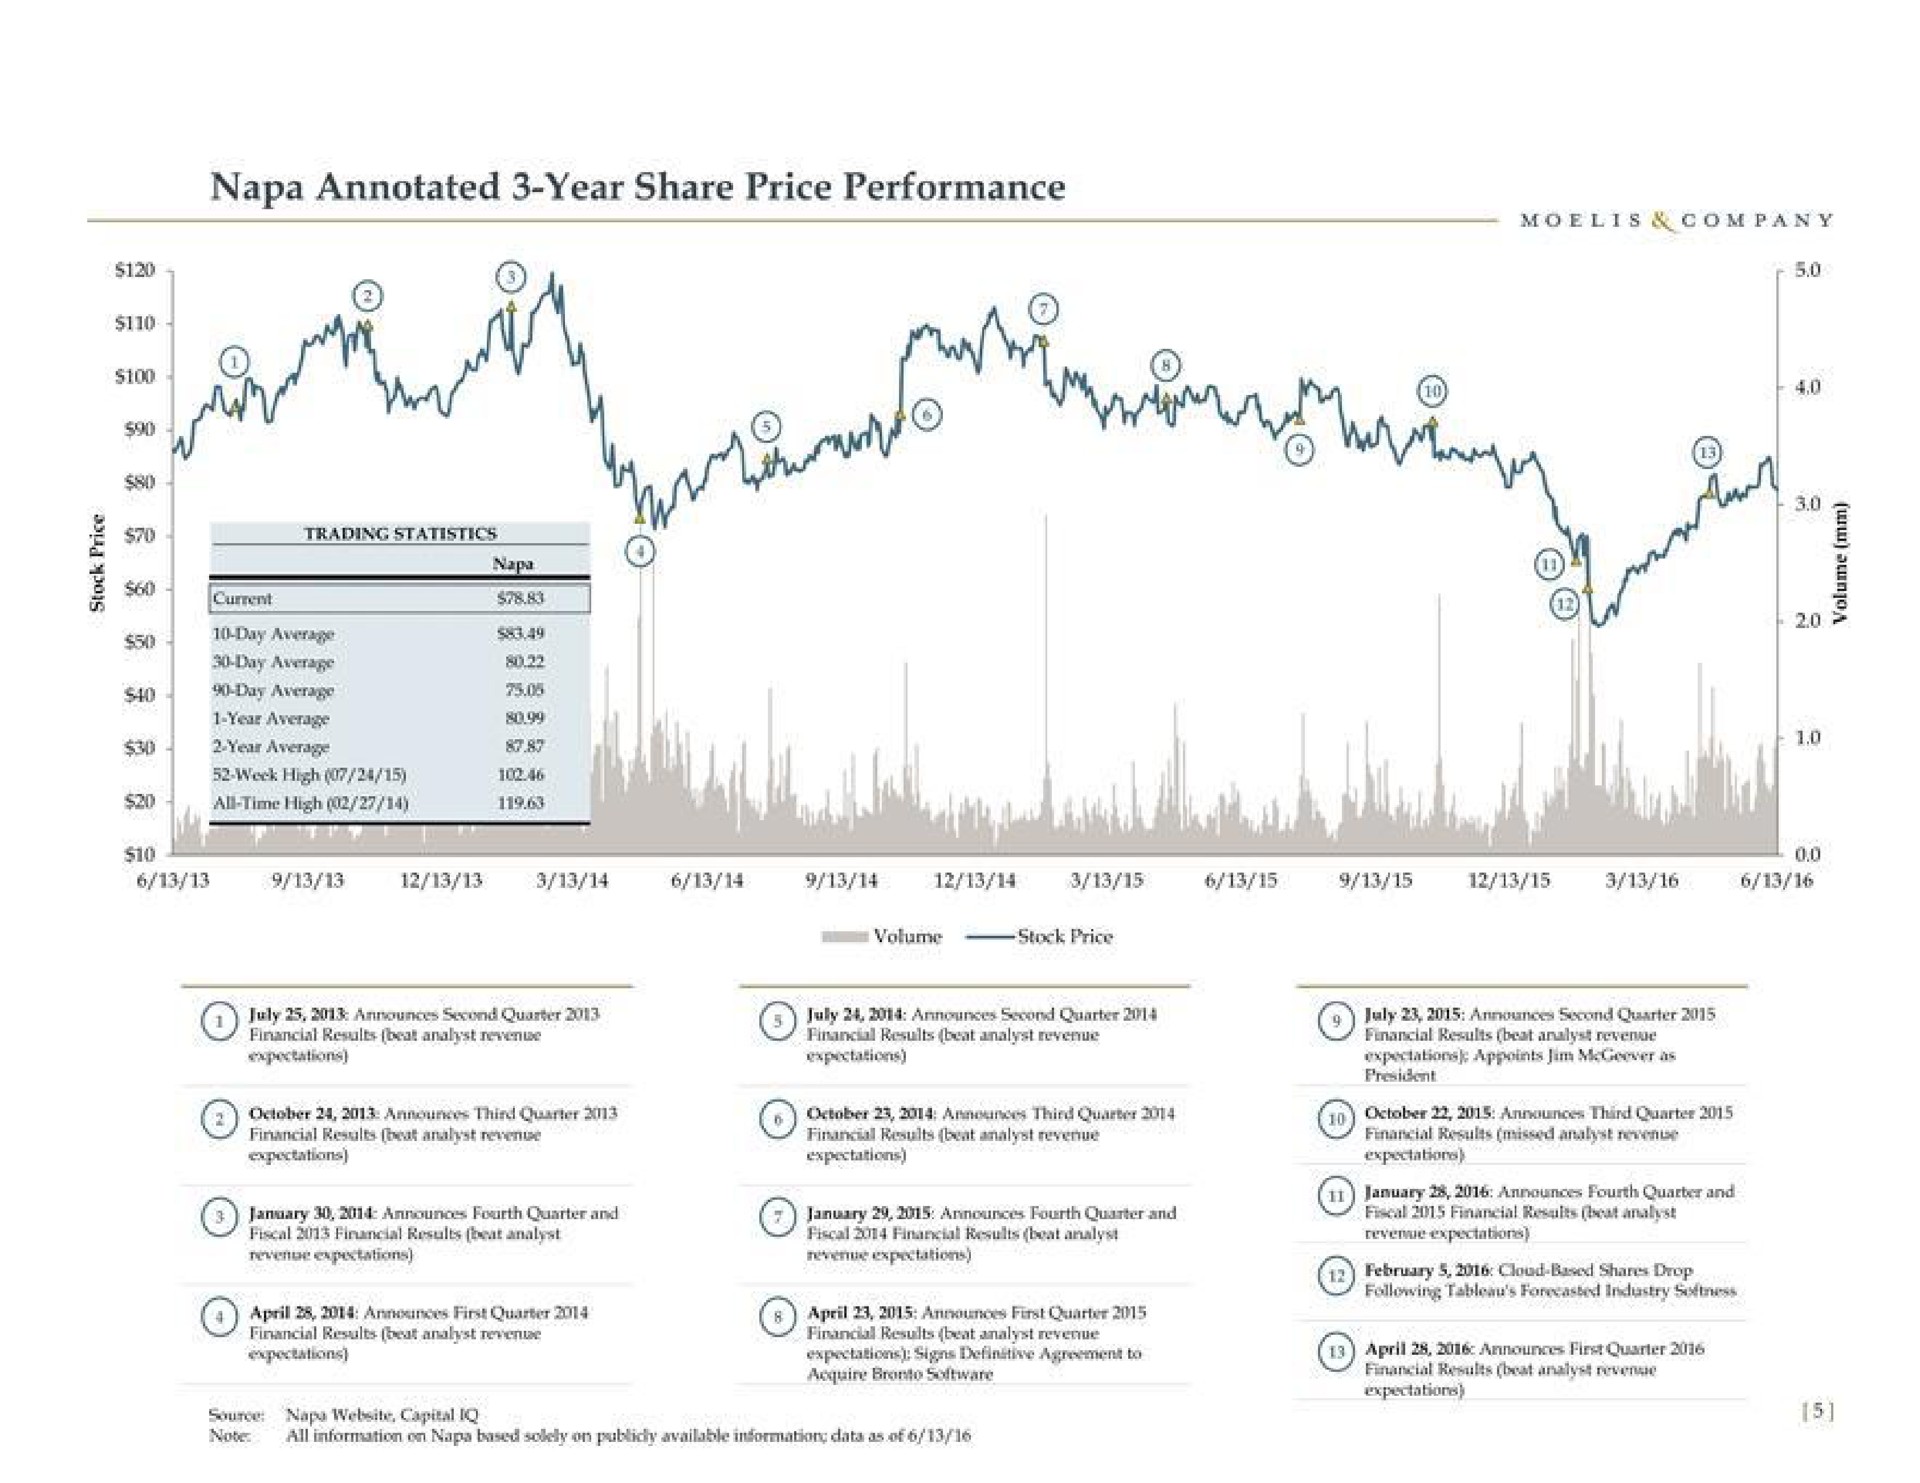 napa annotated year share price performance on | Moelis & Company